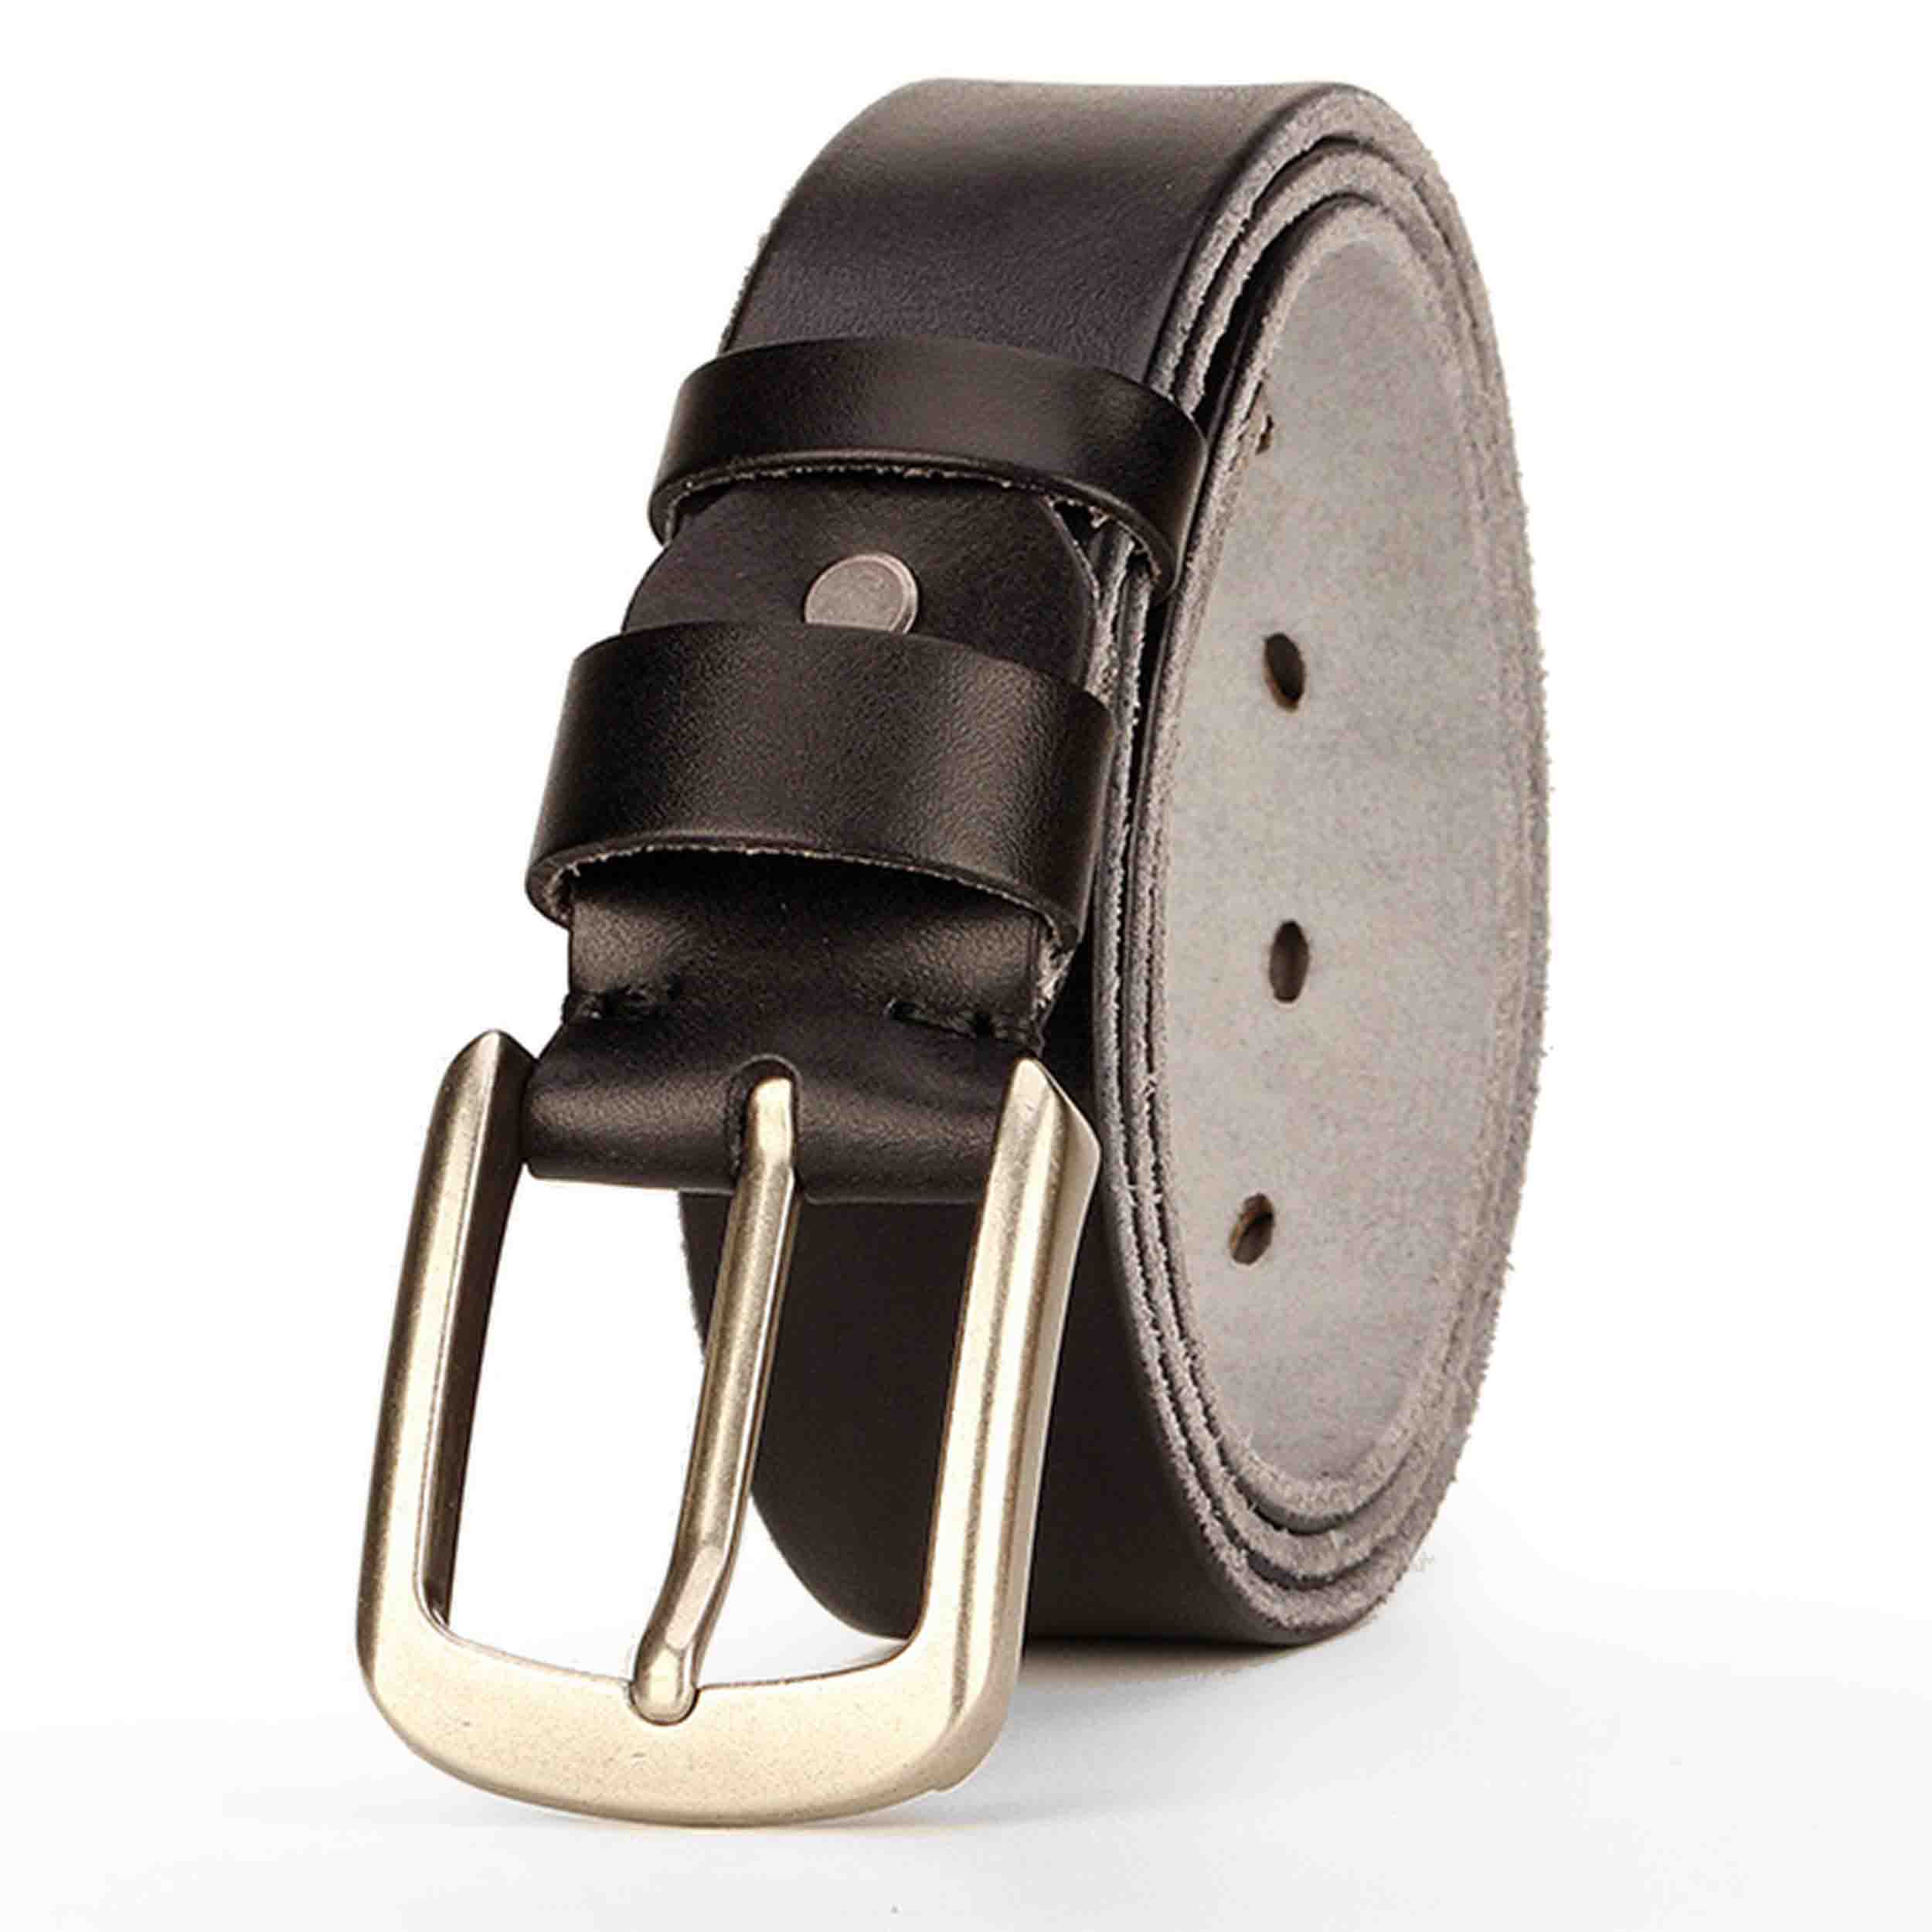 men's casual leather belt black with silver color single prong buckle